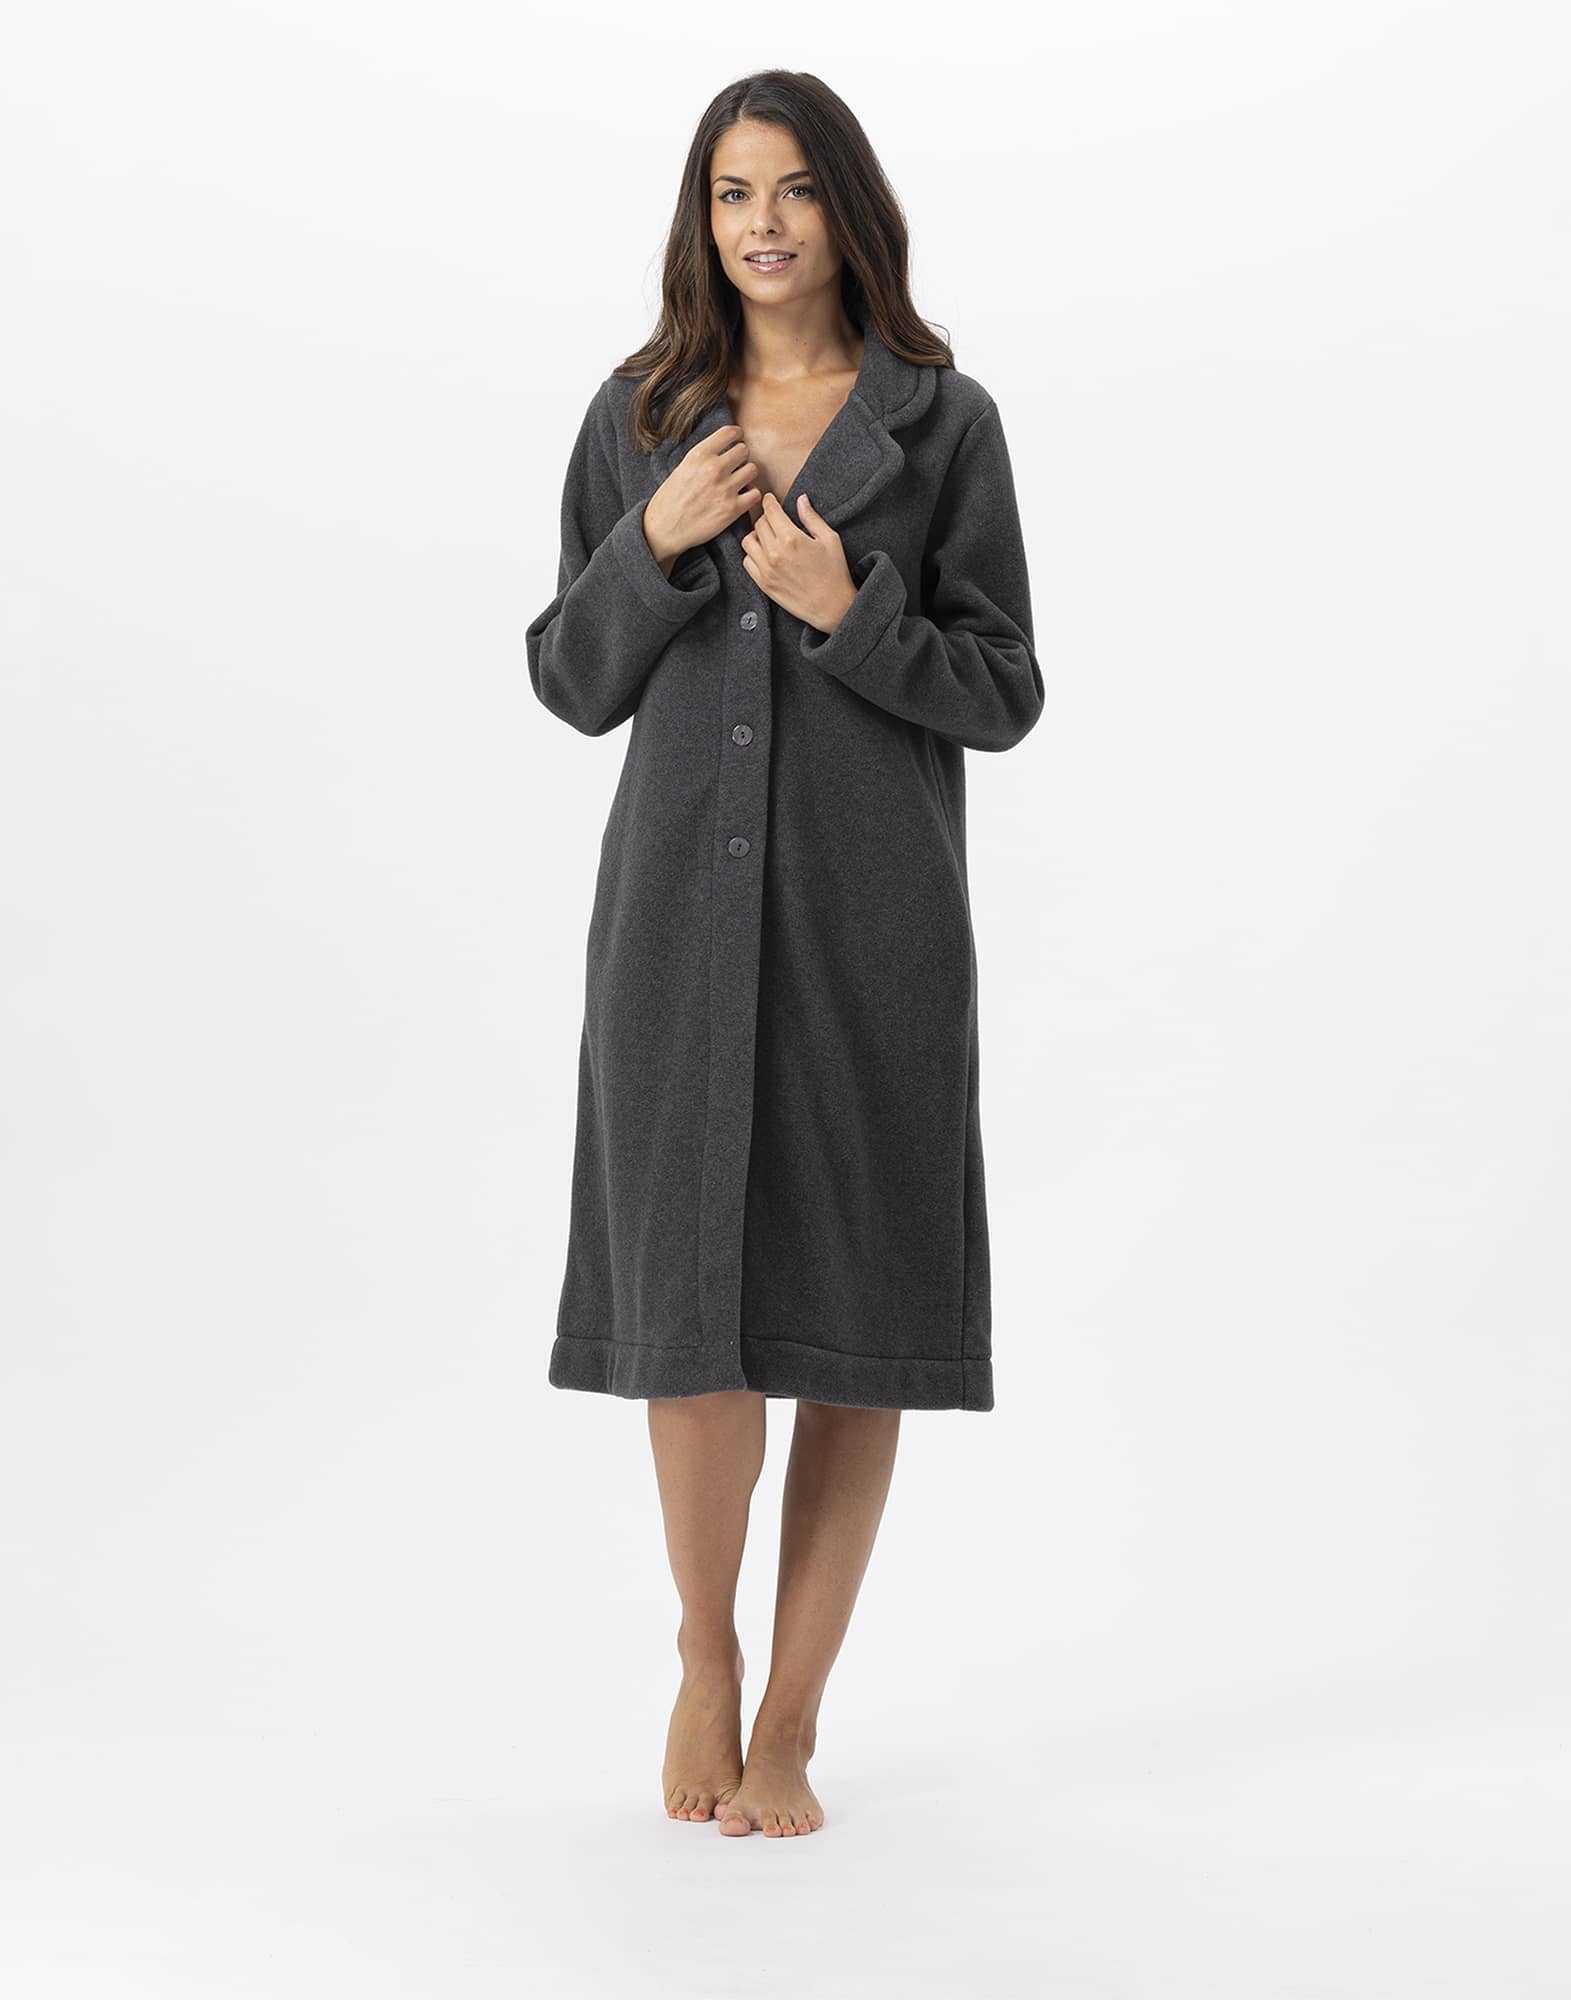 Fleece robe ESSENTIEL 652 in anthracite | Lingerie le Chat